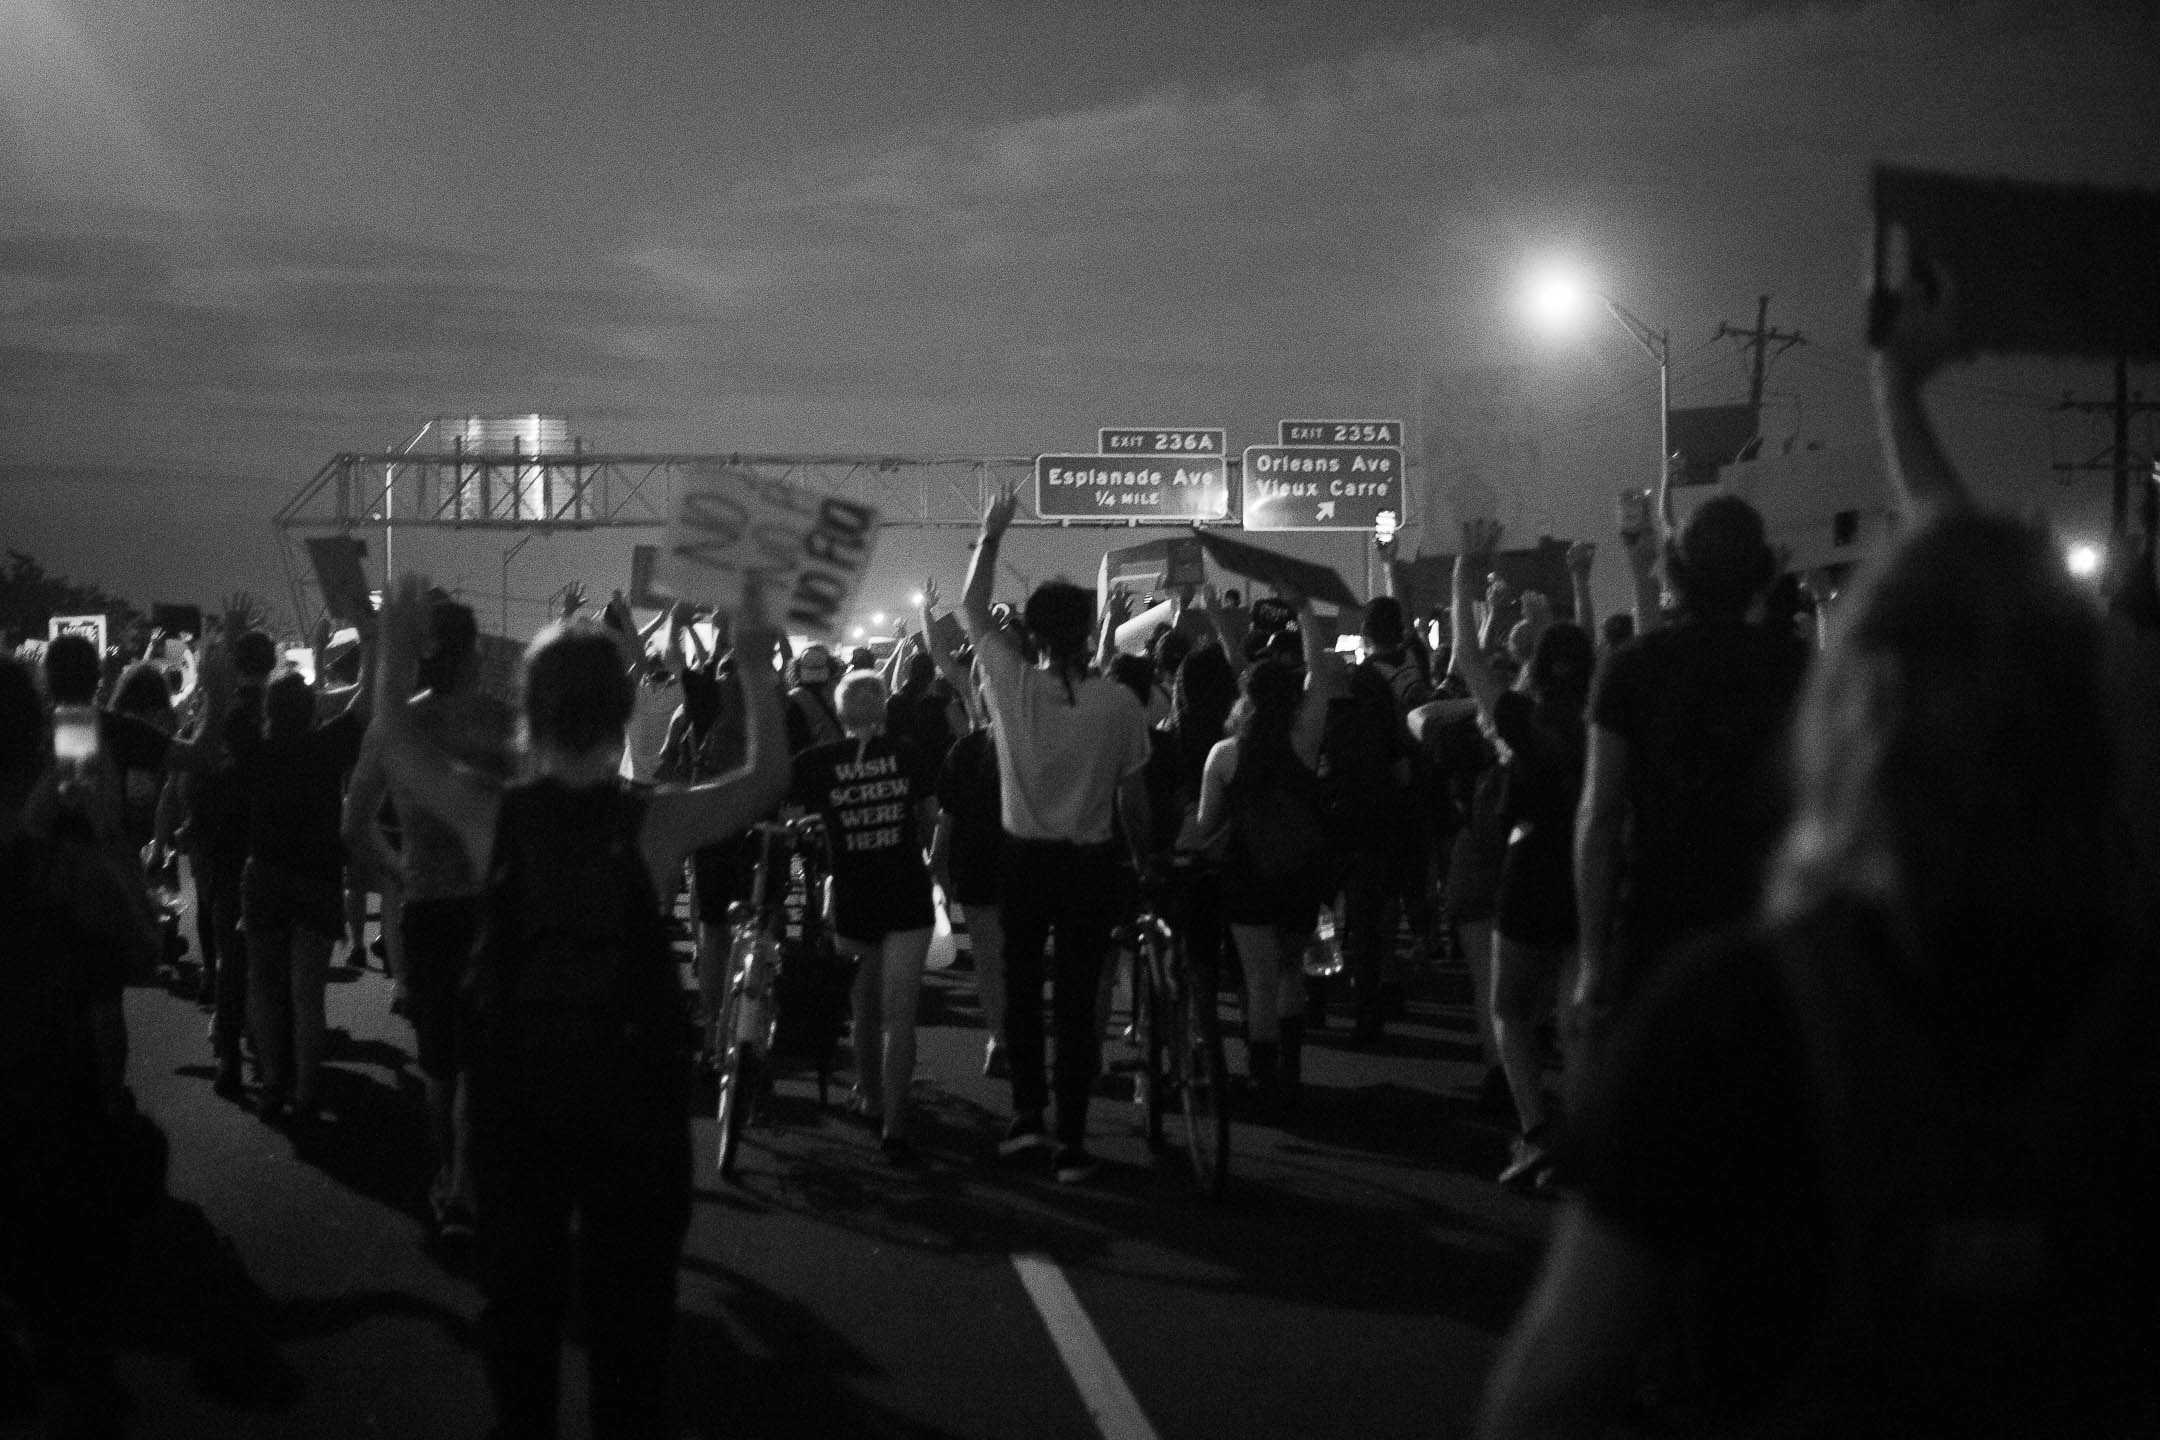 A black-and-white photo. A crowd of protesters fills a highway at night, lit by streetlights. They move together, on foot and on bikes, holding signs and raising fists. One person's shirt reads "Wish Screw Were Here". Above the protesters' heads, a highway gantry displays signs for Esplanade Ave and Orleans Ave / Vieux Carre.